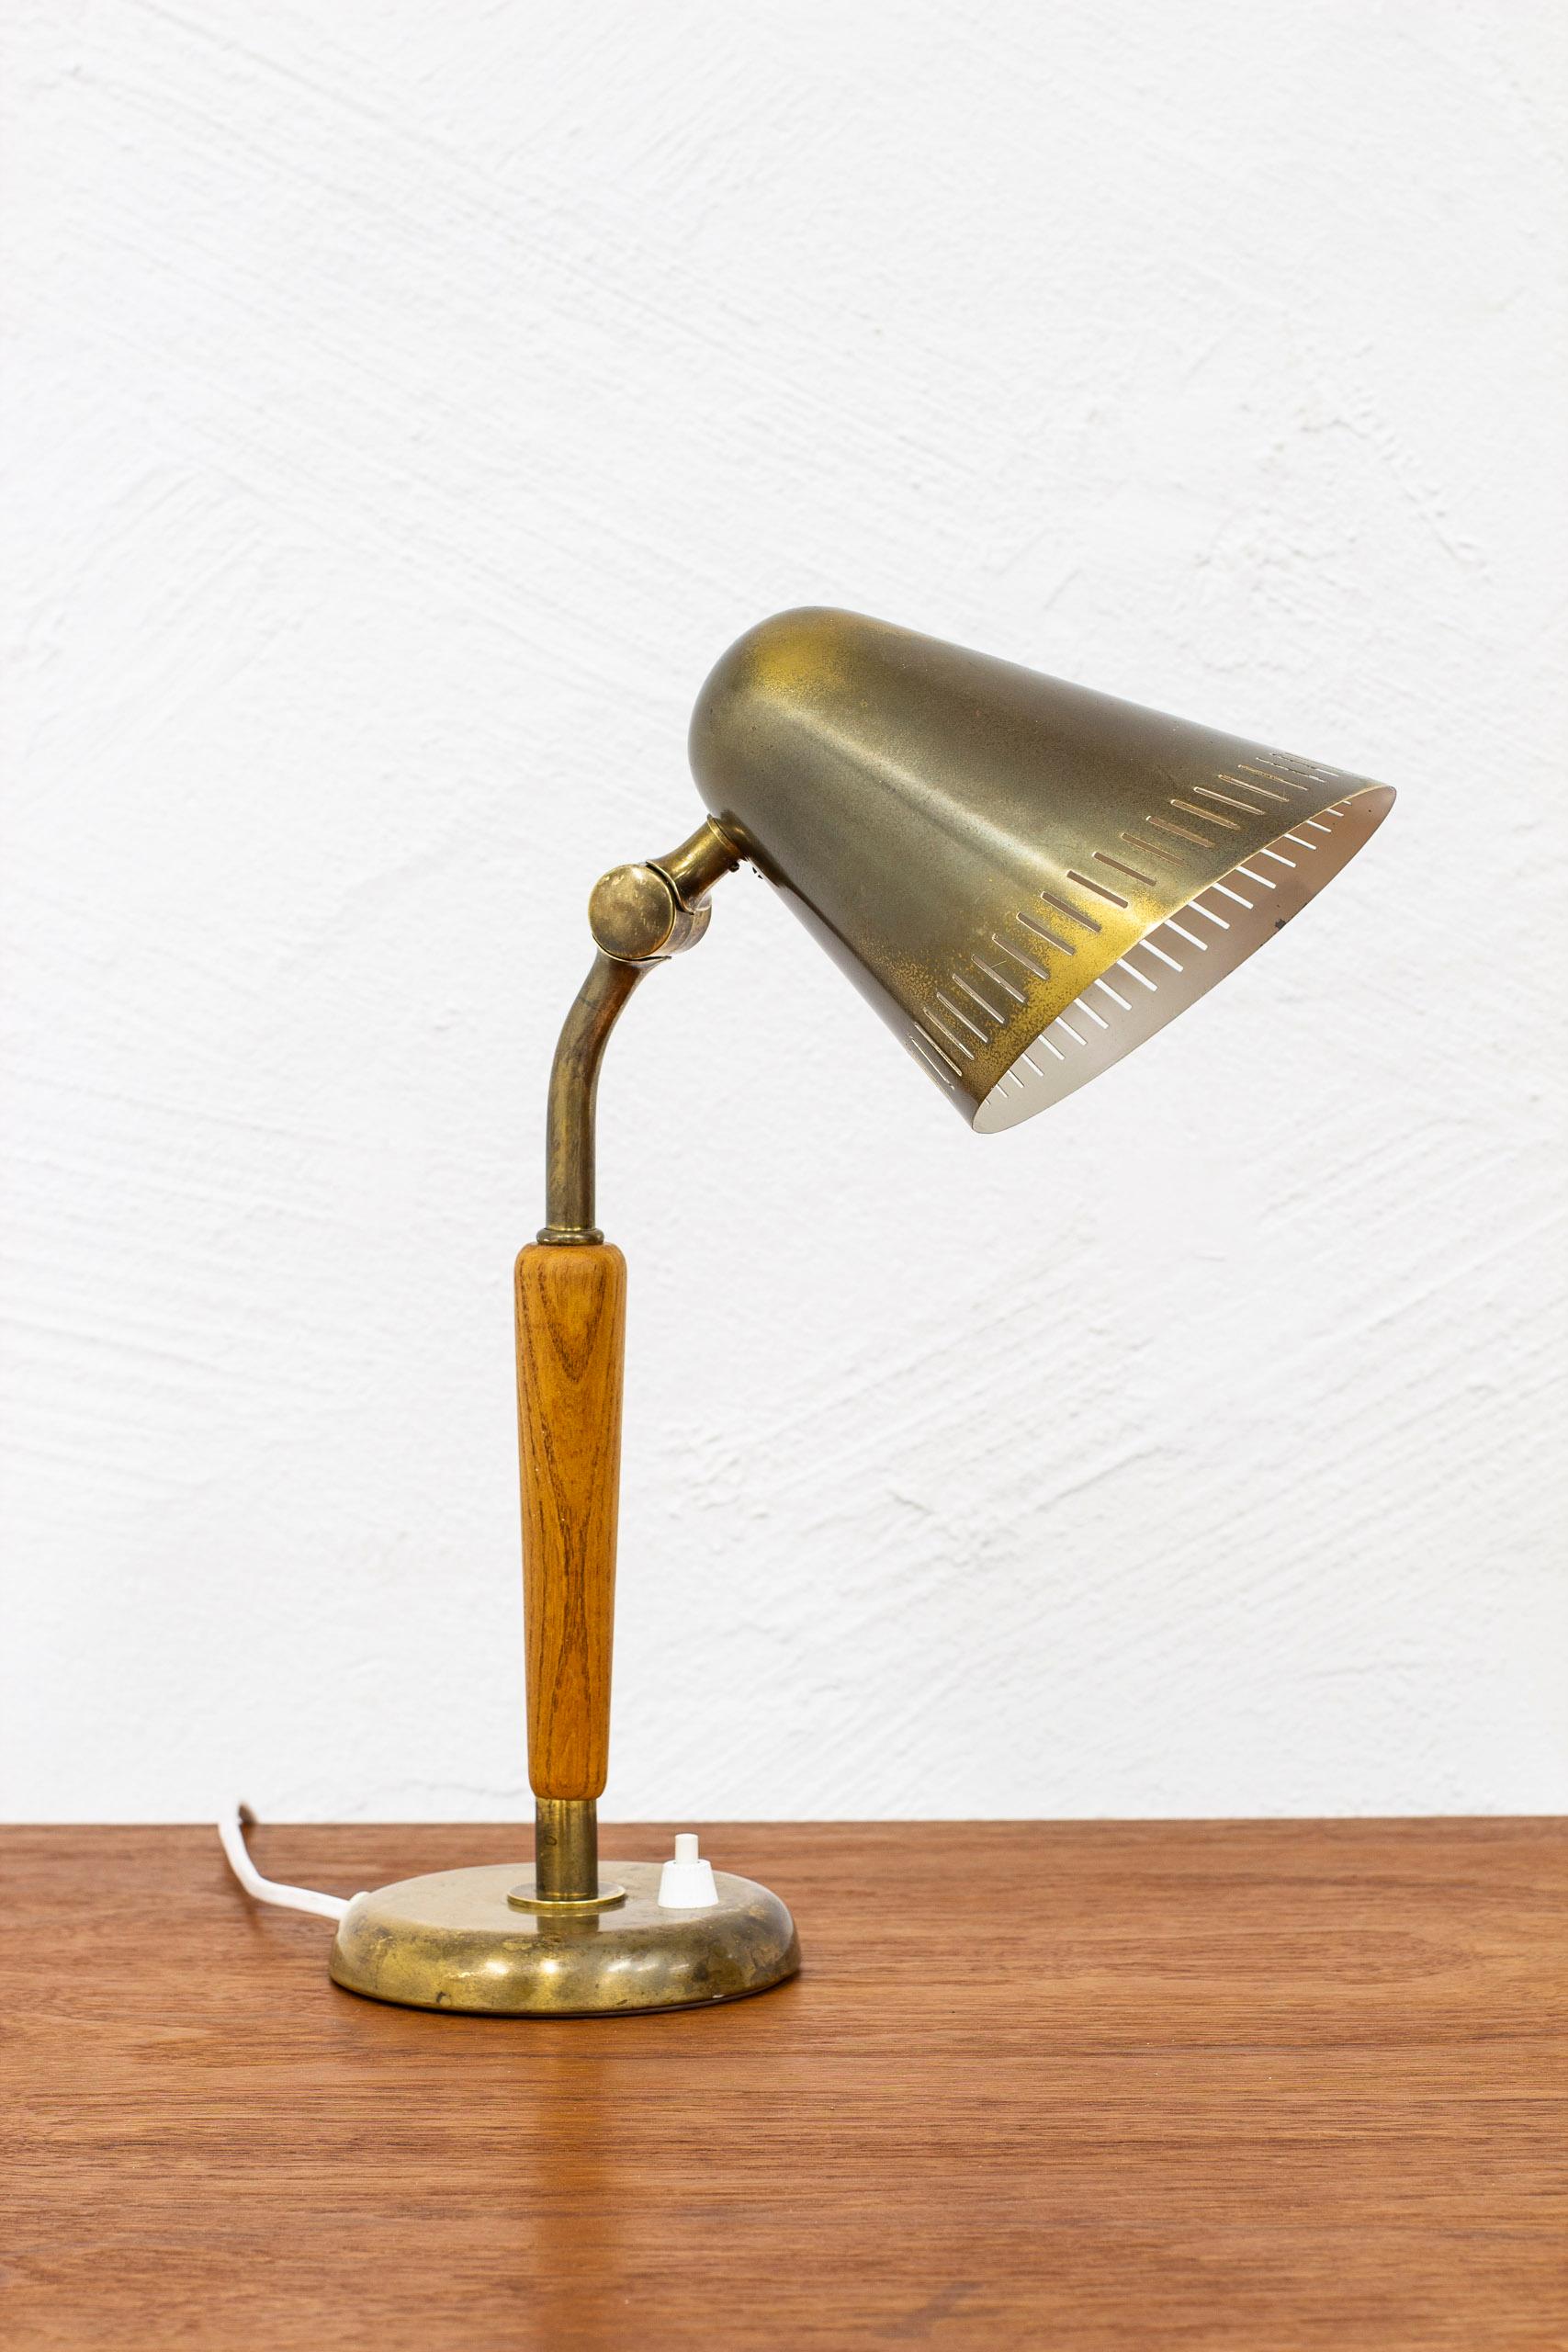 Table lamp model number 15365 designed by Harald Elof Notini. Produced in Stockholm by Böhlmarks lampfabrik during the 1940-50s. Made from brass and elm. Adjustable in angle. With light switch on the bas in working order. Good vintage condition with